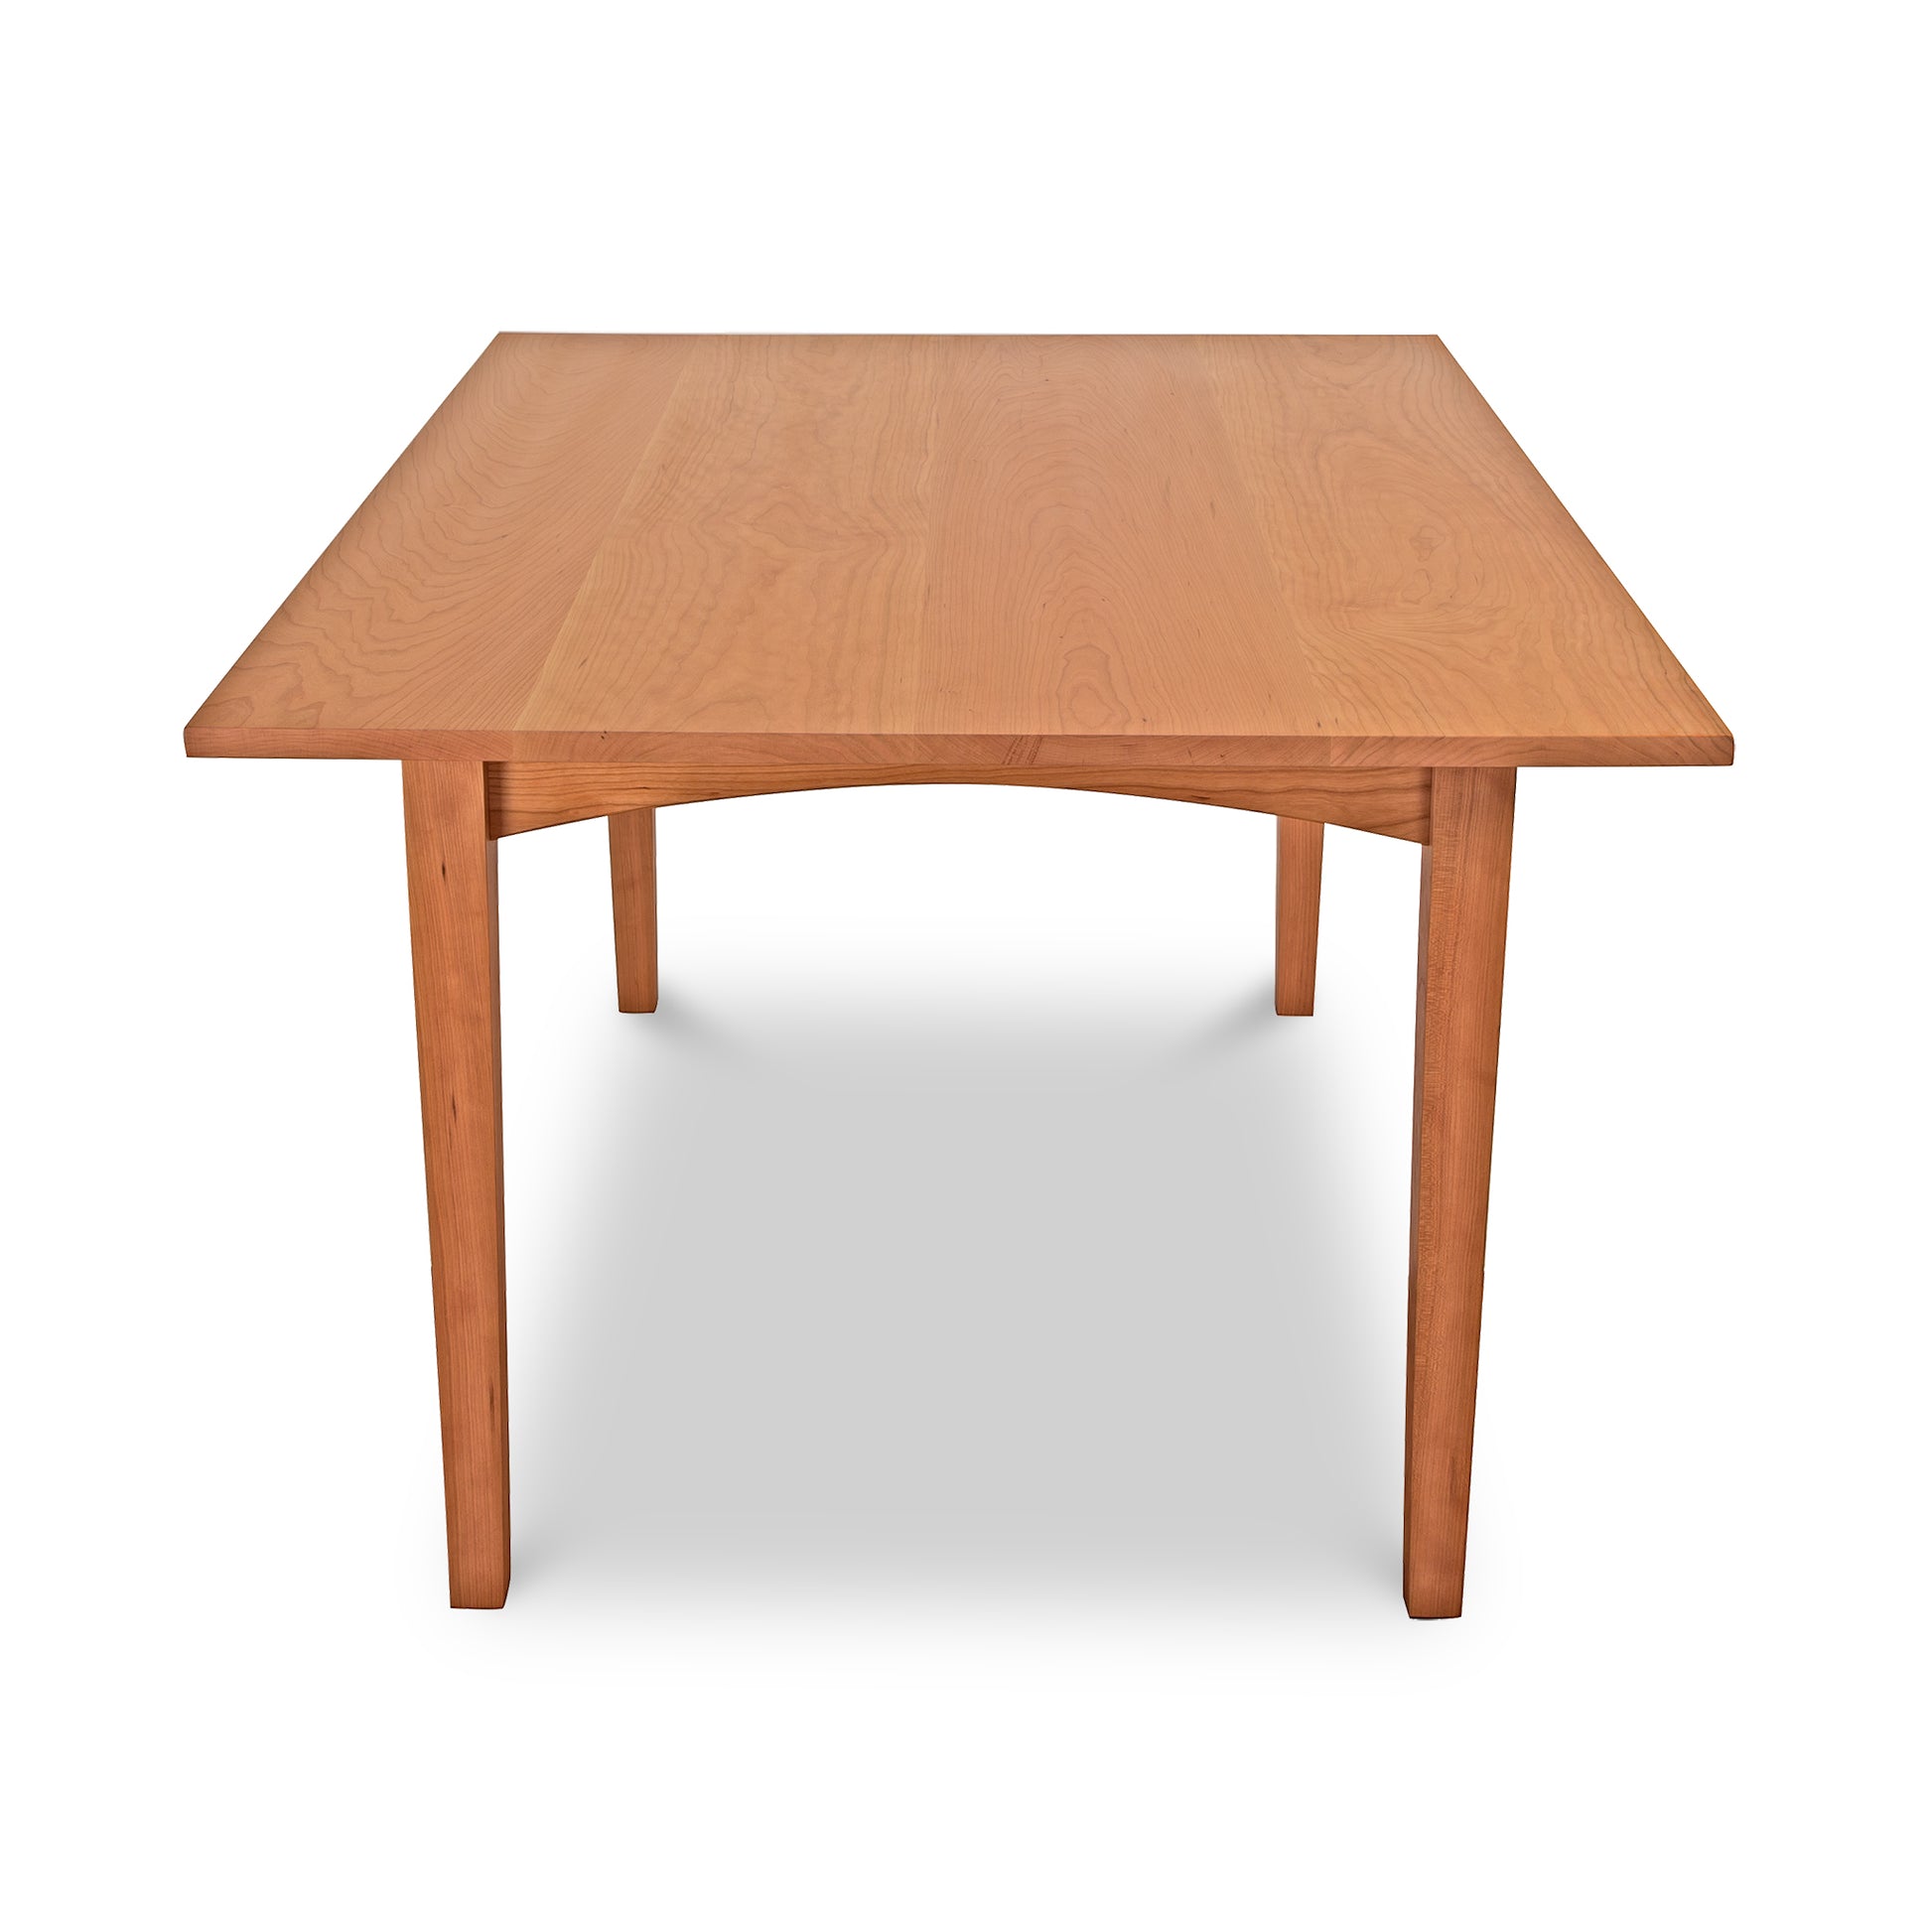 A simple Maple Corner Woodworks American Shaker Rectangular Solid Top Table with a smooth finish and four sturdy legs, isolated on a white background.